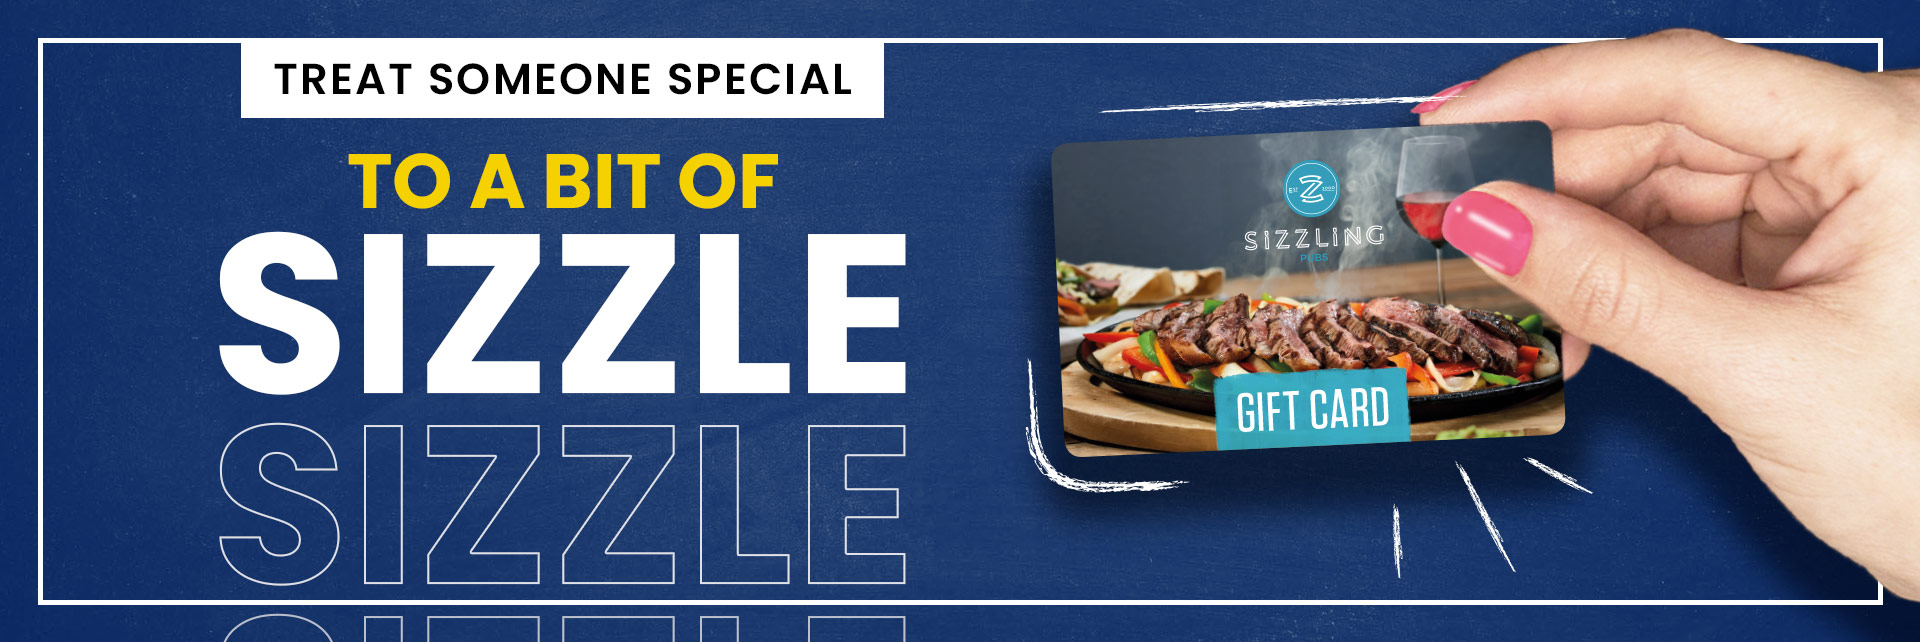 Sizzling Pubs Gift Card at The Black Bull, York in York